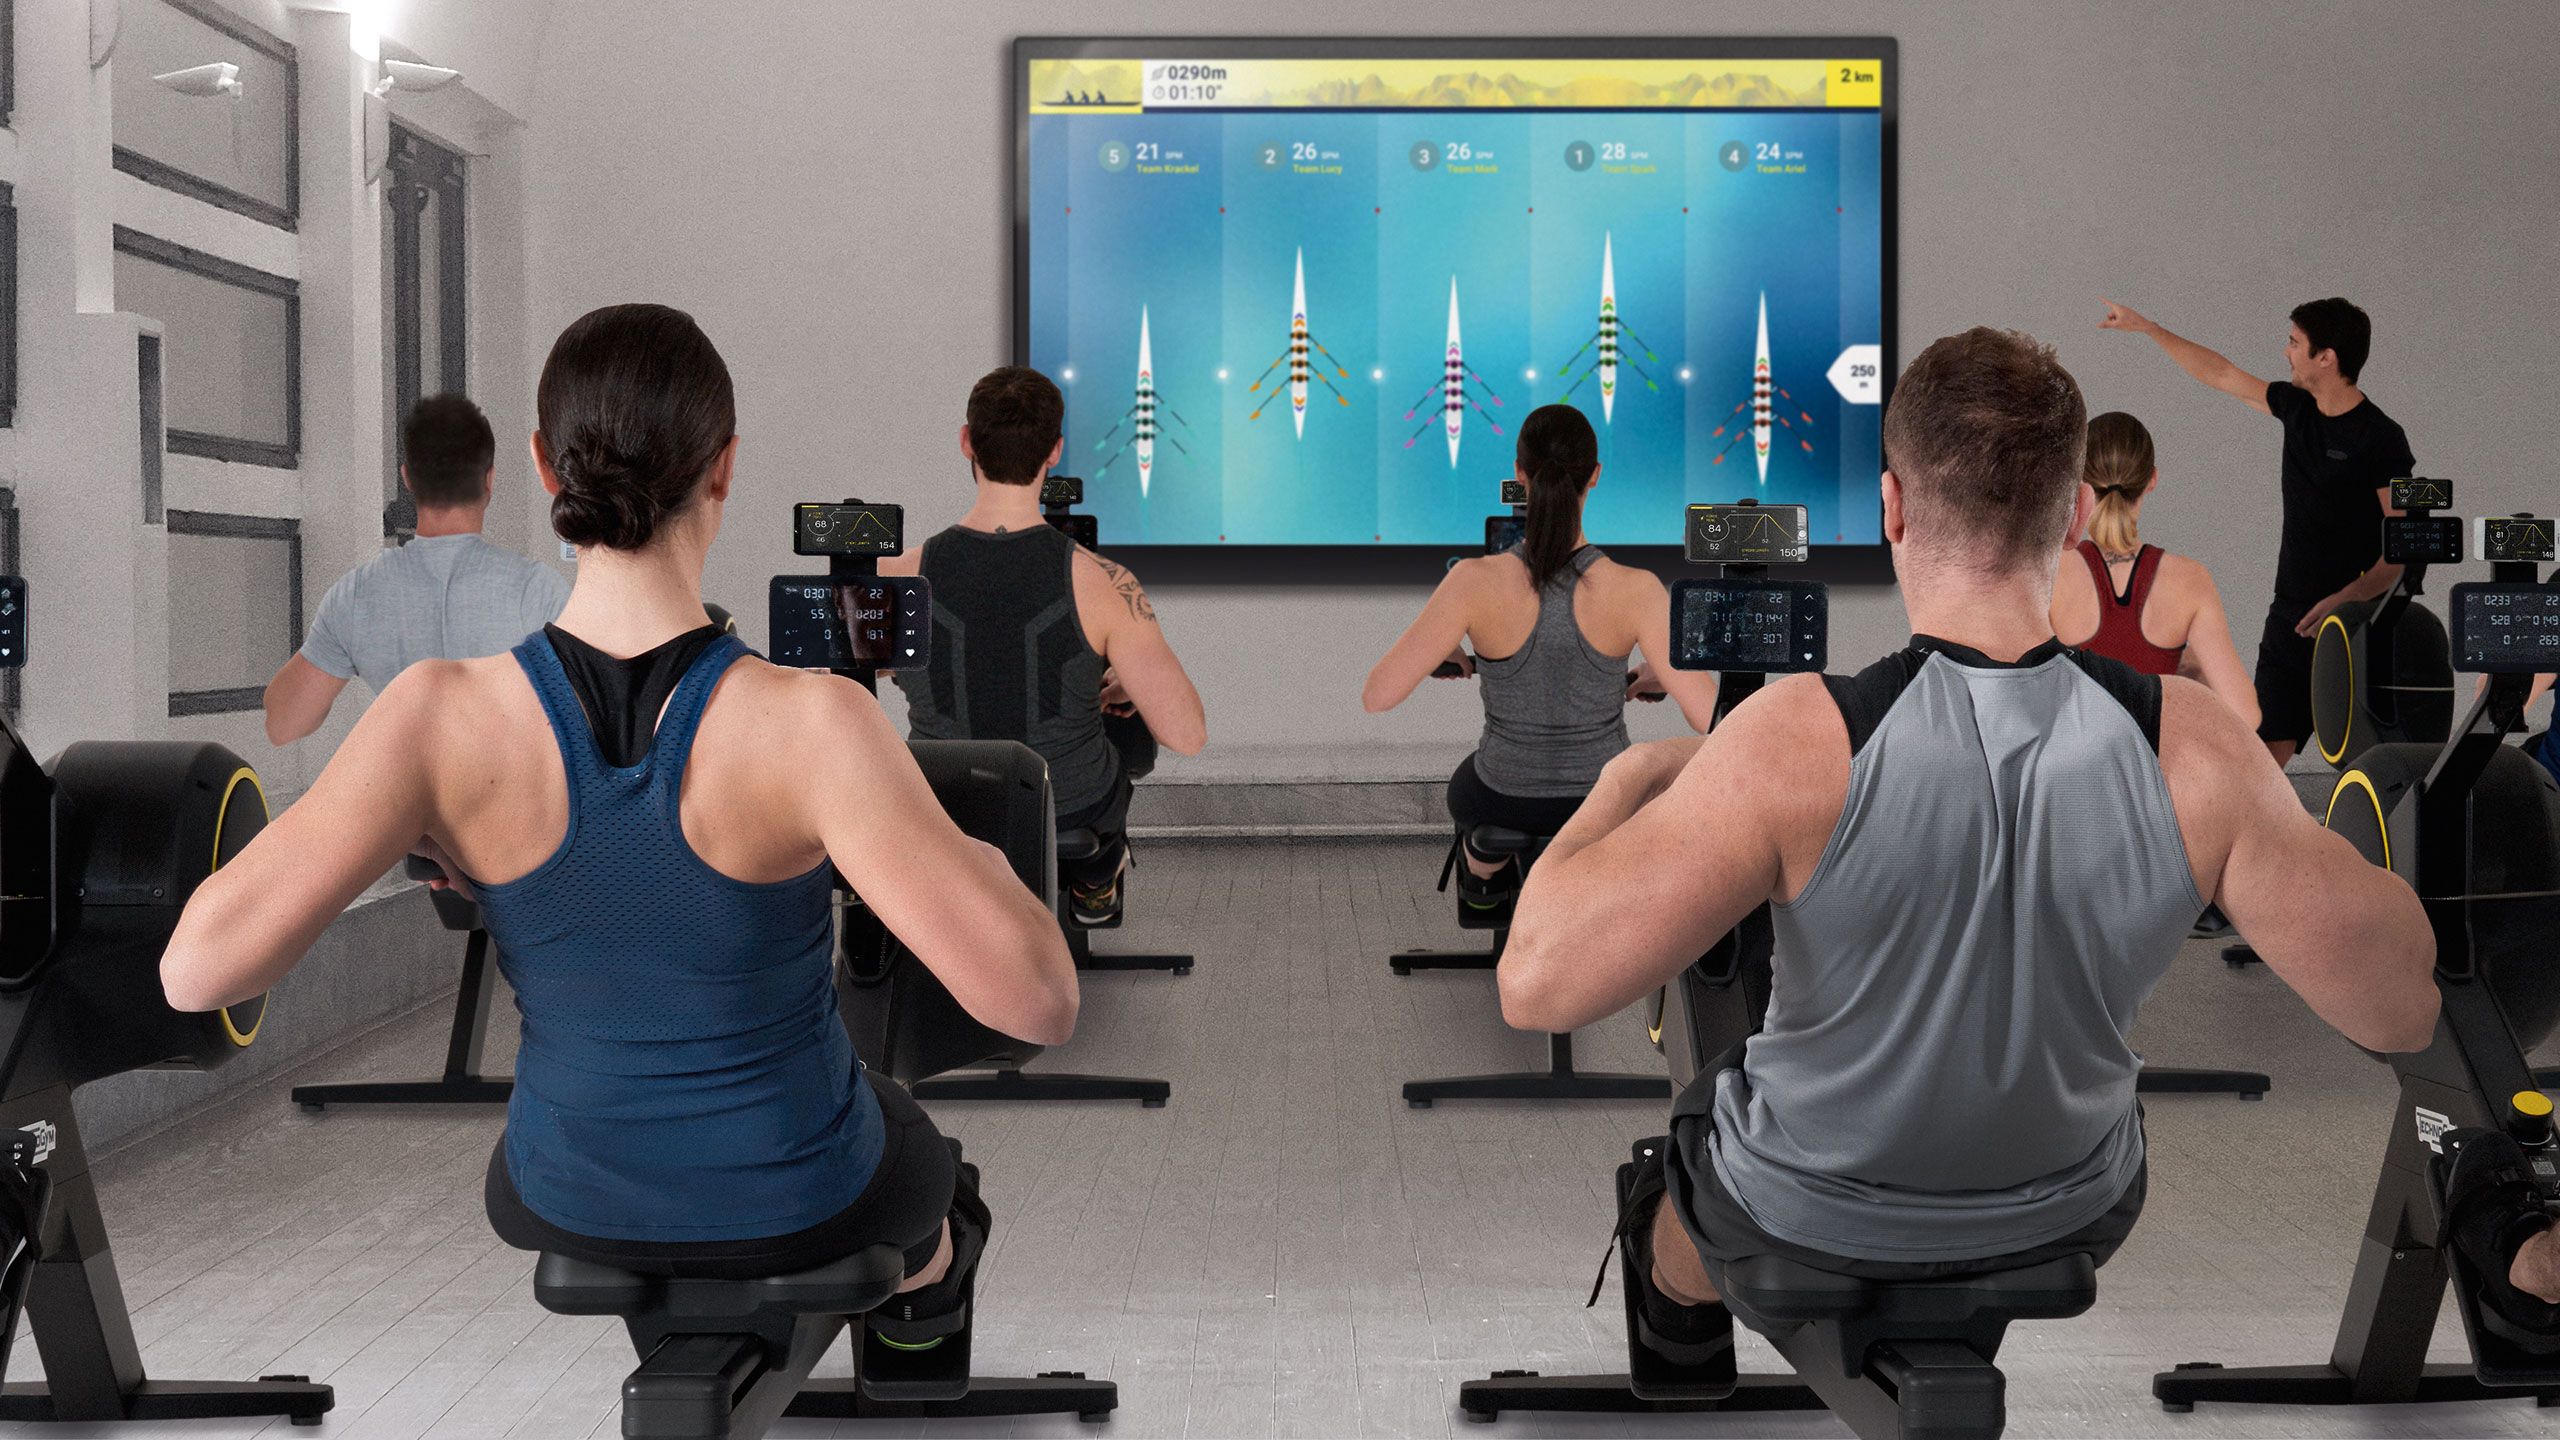 Пауэр класс. The signs that are being trained on Technogym Simulators. Celebrities who Train on Technogym Simulators.